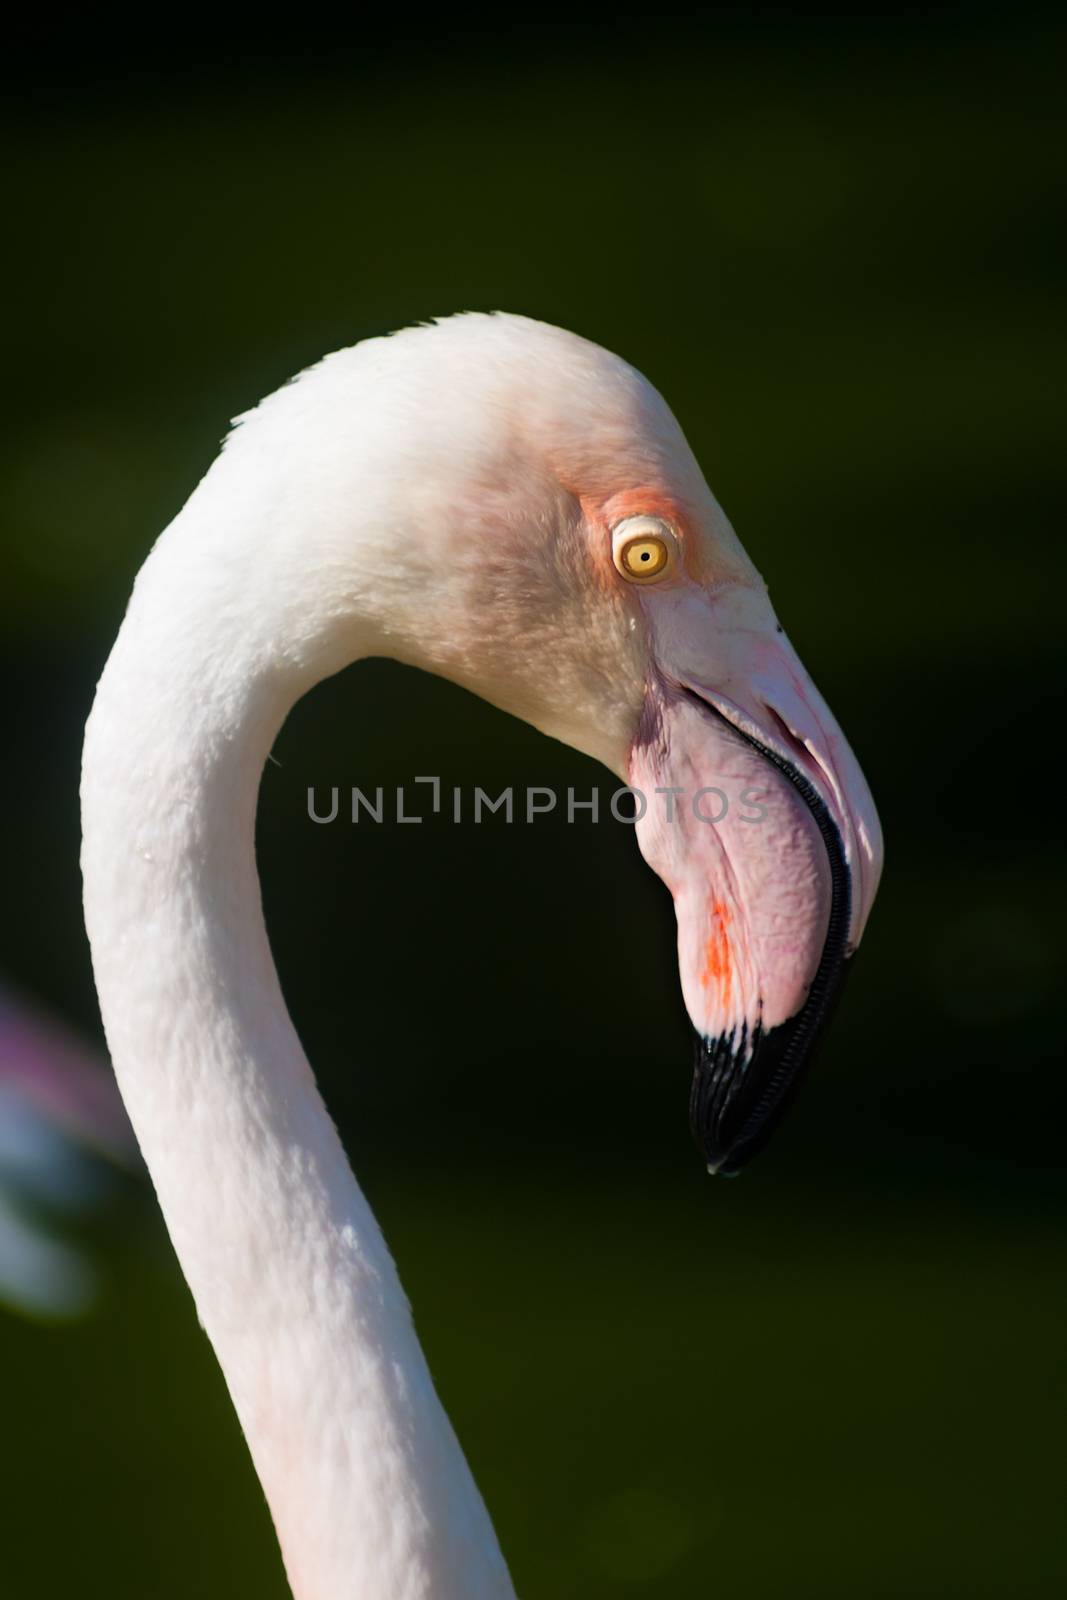 Flamingos or Flamingoes are a type of wading bird in the genus Phoenicopterus, the only genus in the family Phoenicopteridae. There are four flamingo species in the Americas and two species in the Old World.